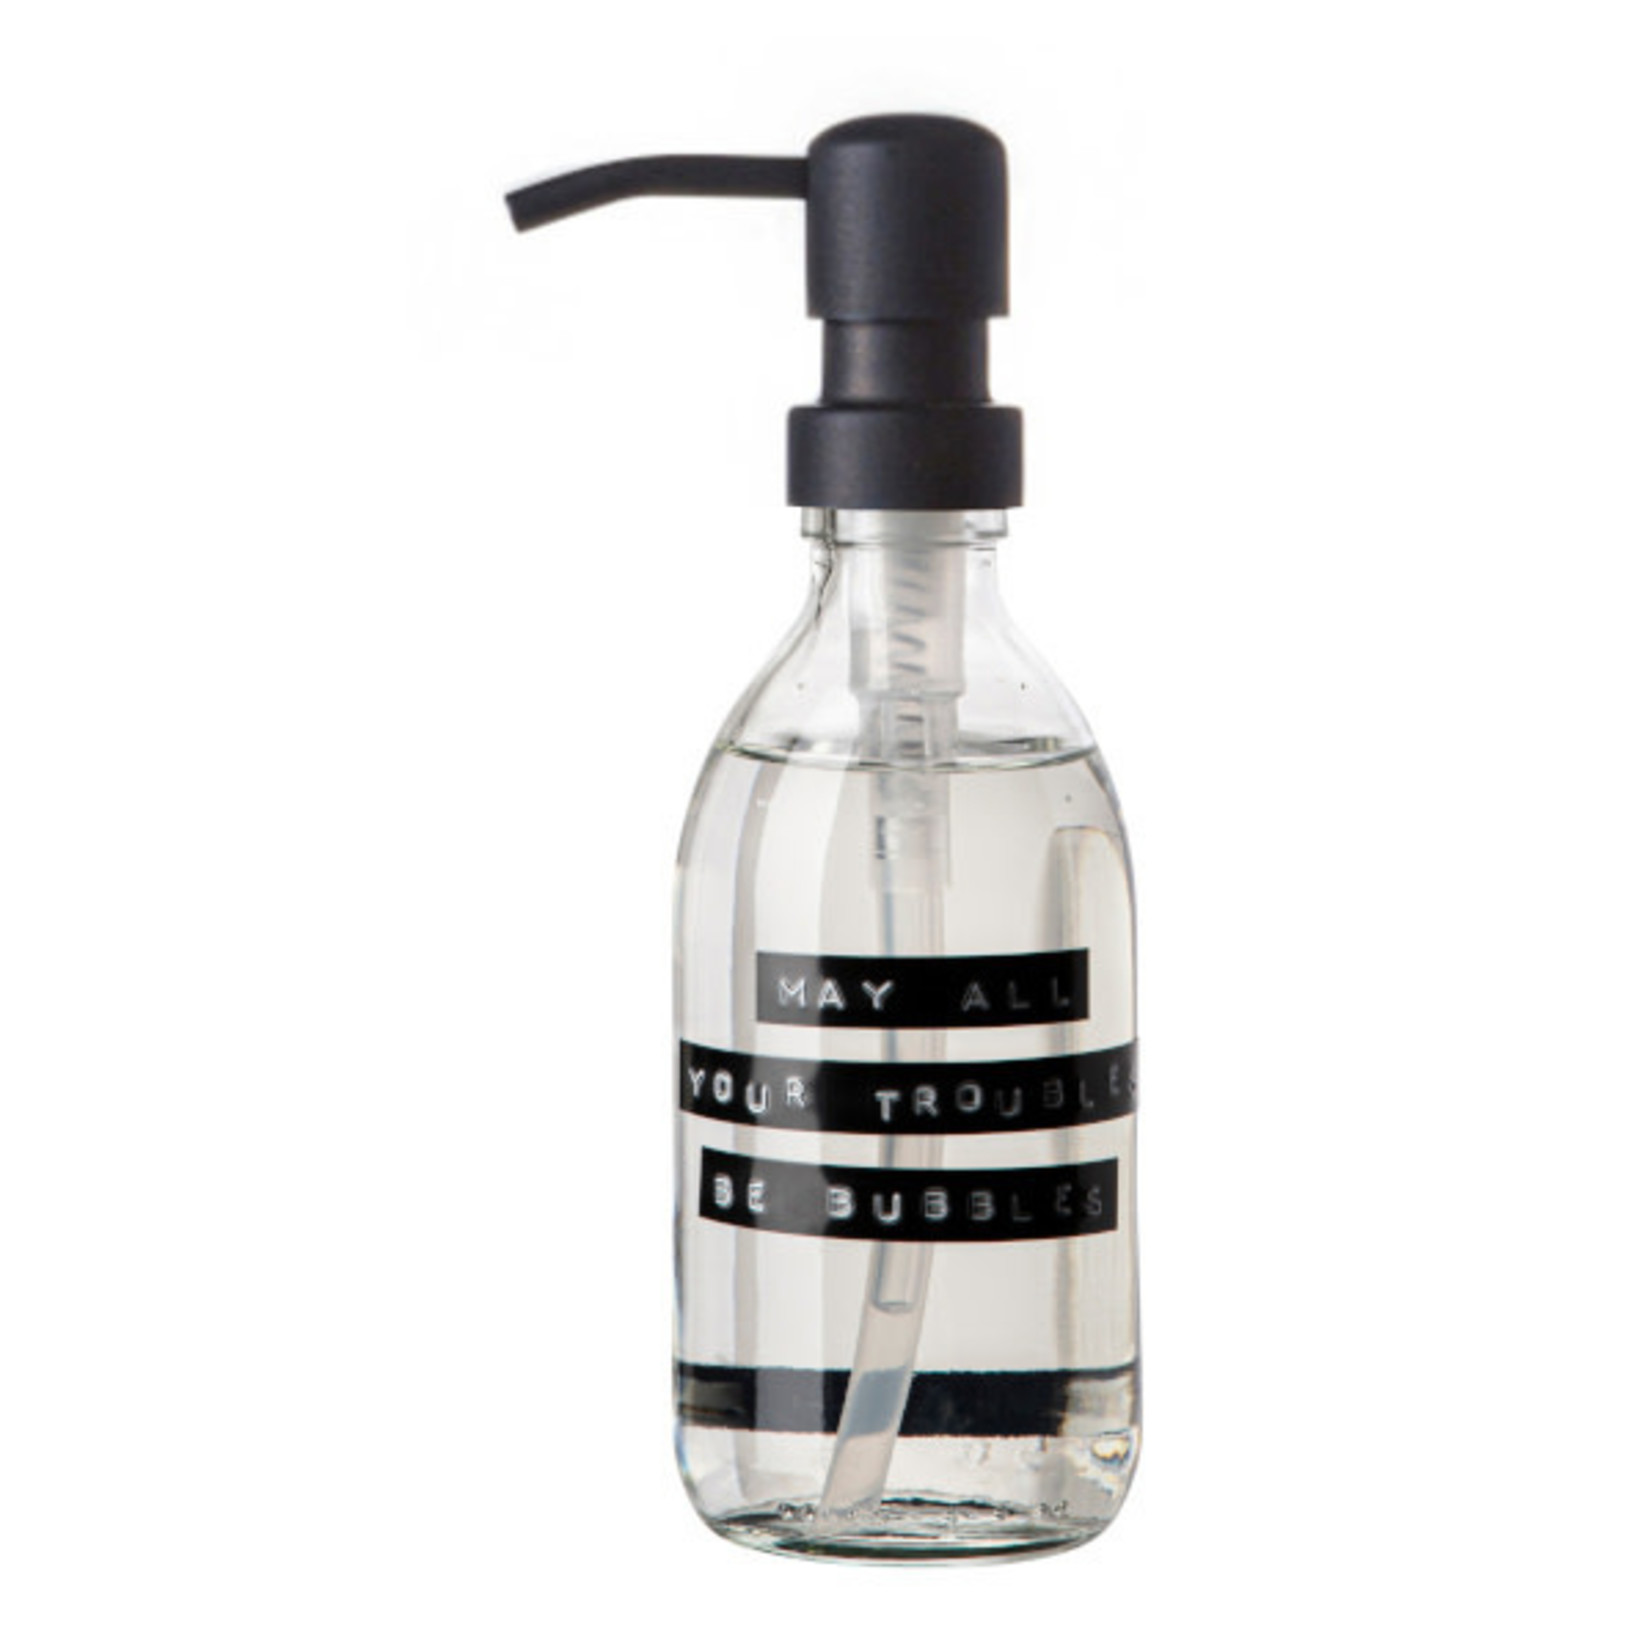 Wellmark Soap dispenser transparent glass fresh linen hand soap 250ML. black MAY ALL YOUR TROUBLES BE BUBBLES